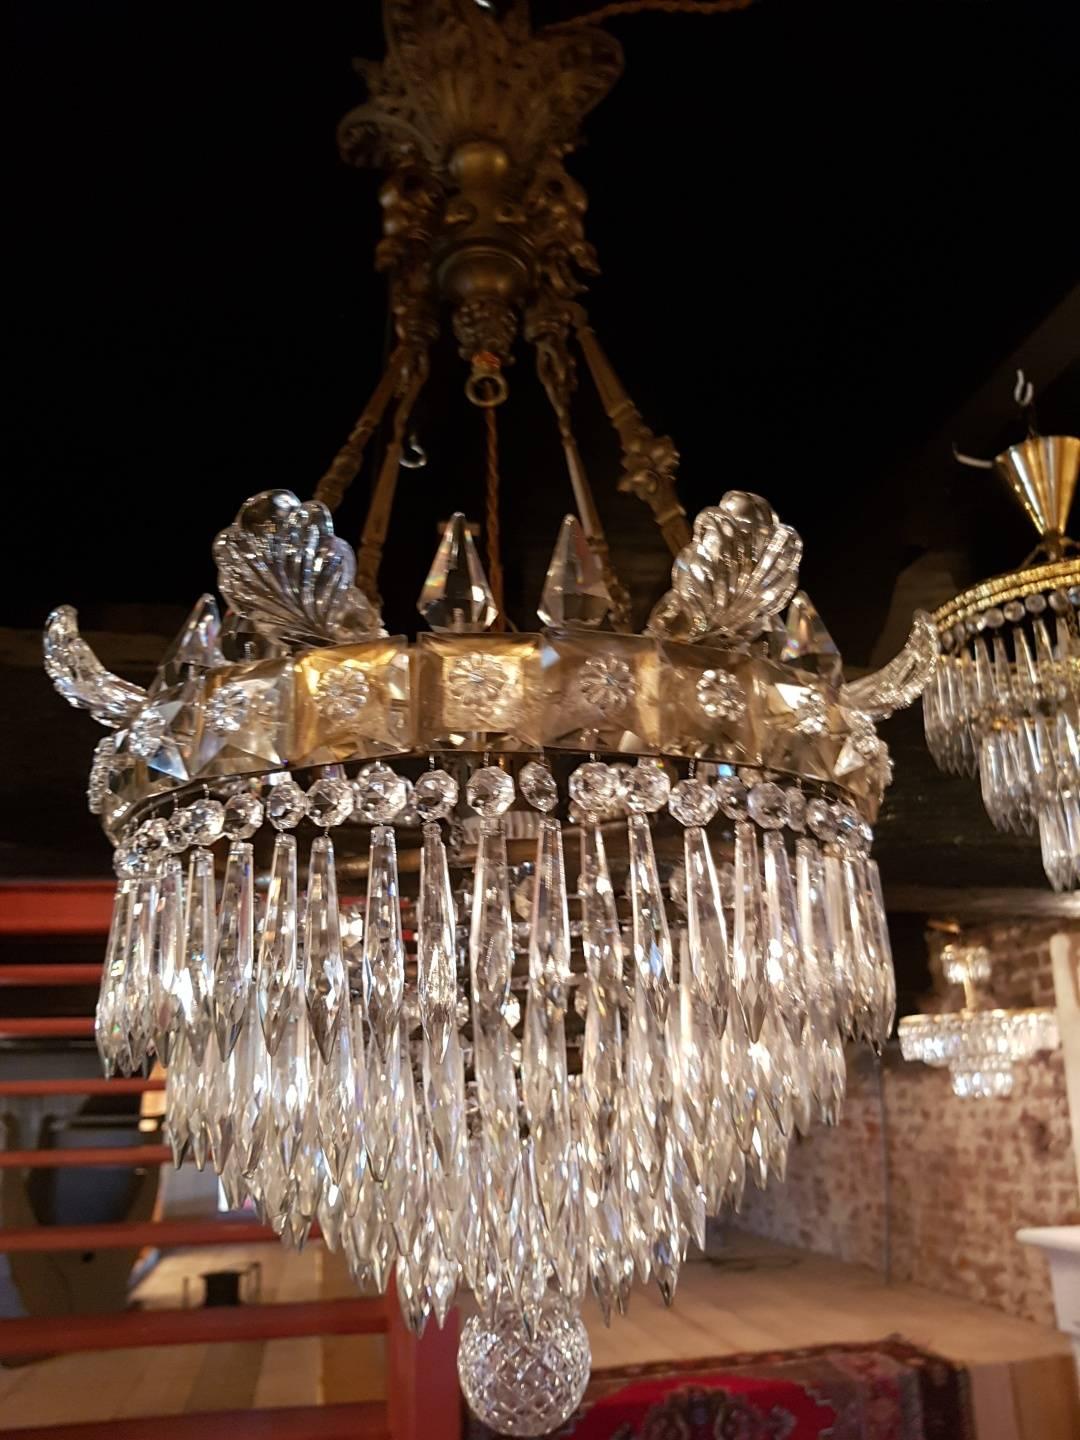 Antique waterfall chandelier with a waterfall of cut-glass. At the top of the ring are crystal pinnacles and glass ornaments. The ring itself is decorated with square stiff pieces of glass. The top of the chandelier and the hanging construction is